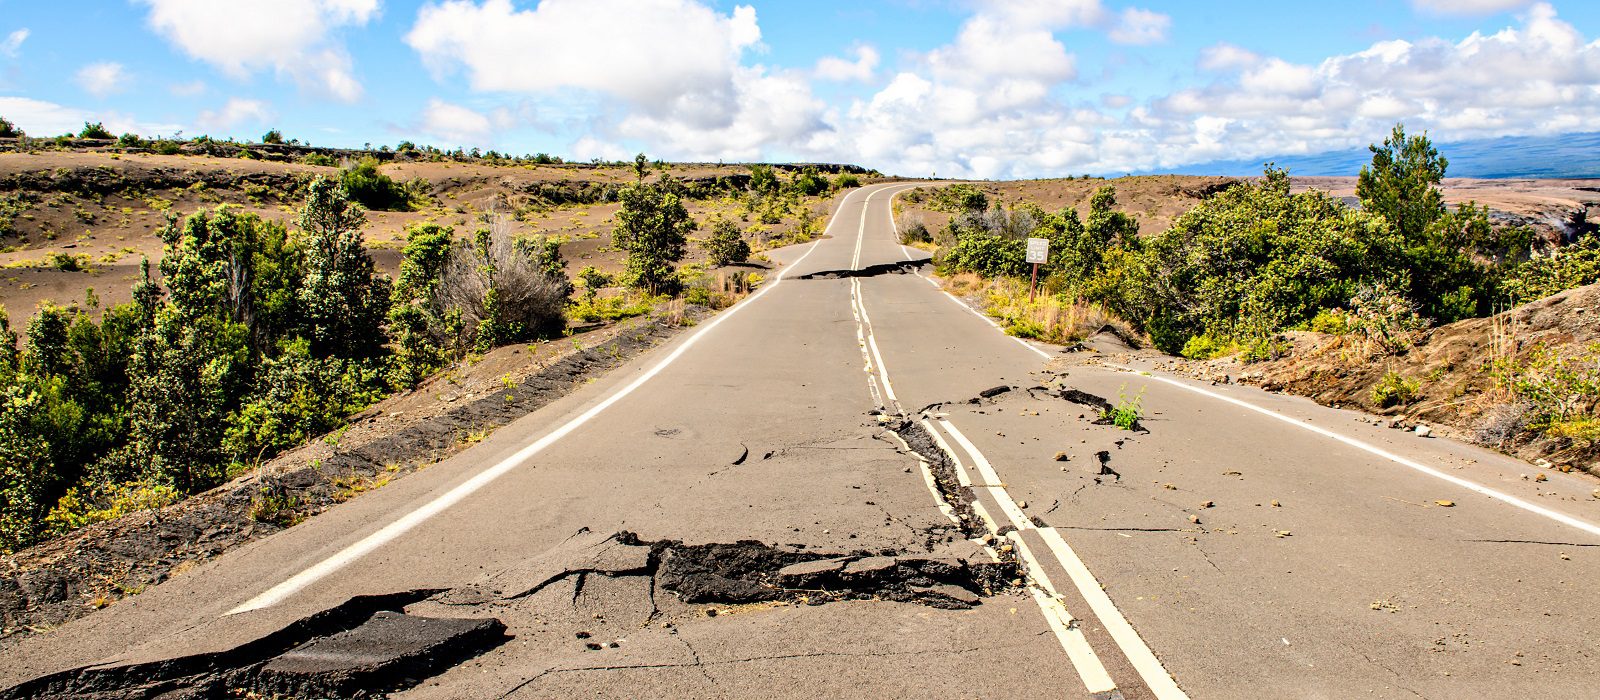 Damaged asphalt road Crater Rim Drive in the Hawaii Volcanoes National Park after earthquake and eruption of Kilauea